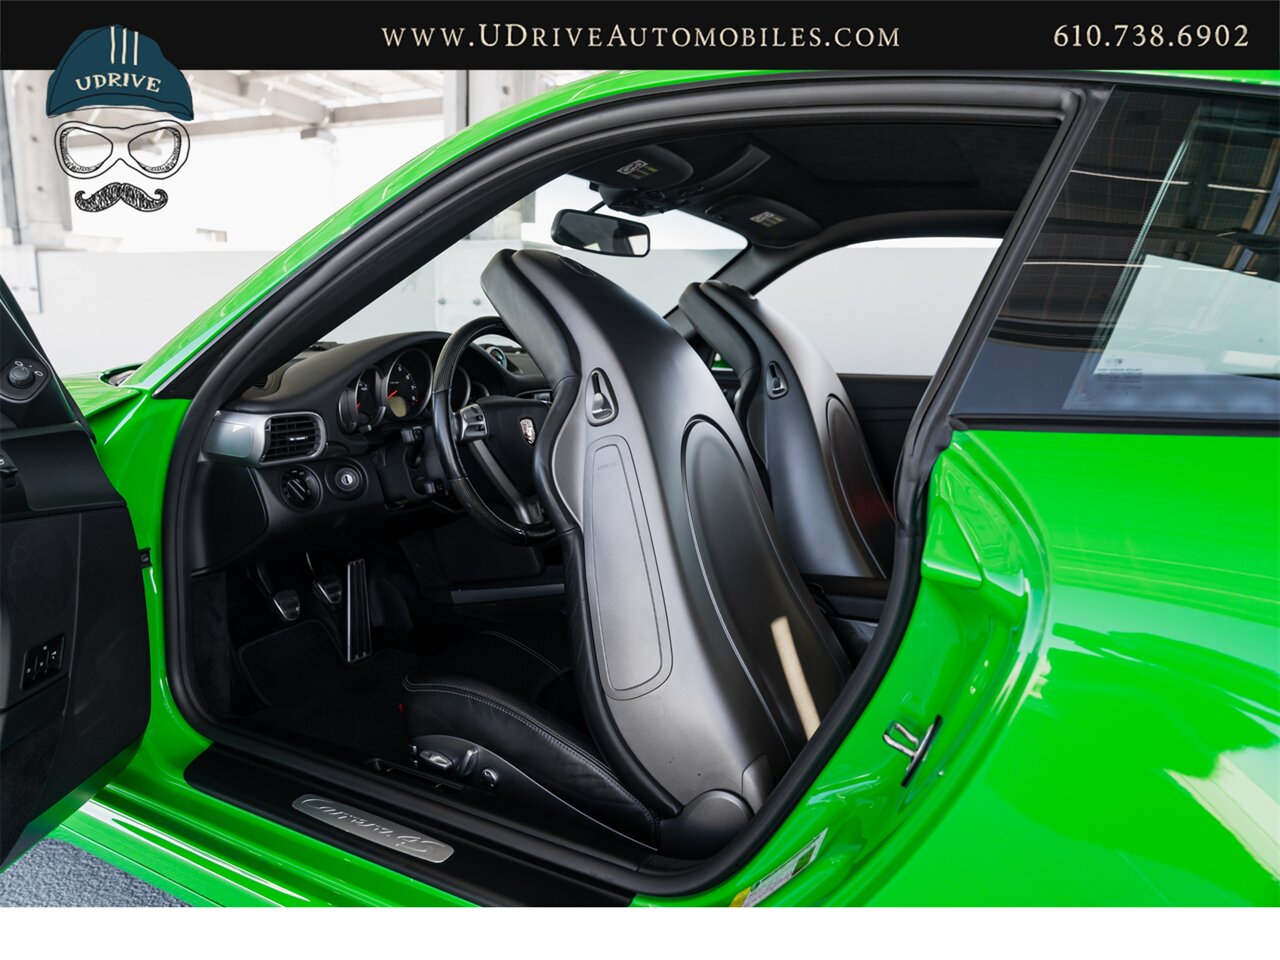 2006 Porsche 911 Carrera 4S  997 PTS Signal Green 6Sp Sport Sts Spt Chrono Spt Exhst - Photo 48 - West Chester, PA 19382